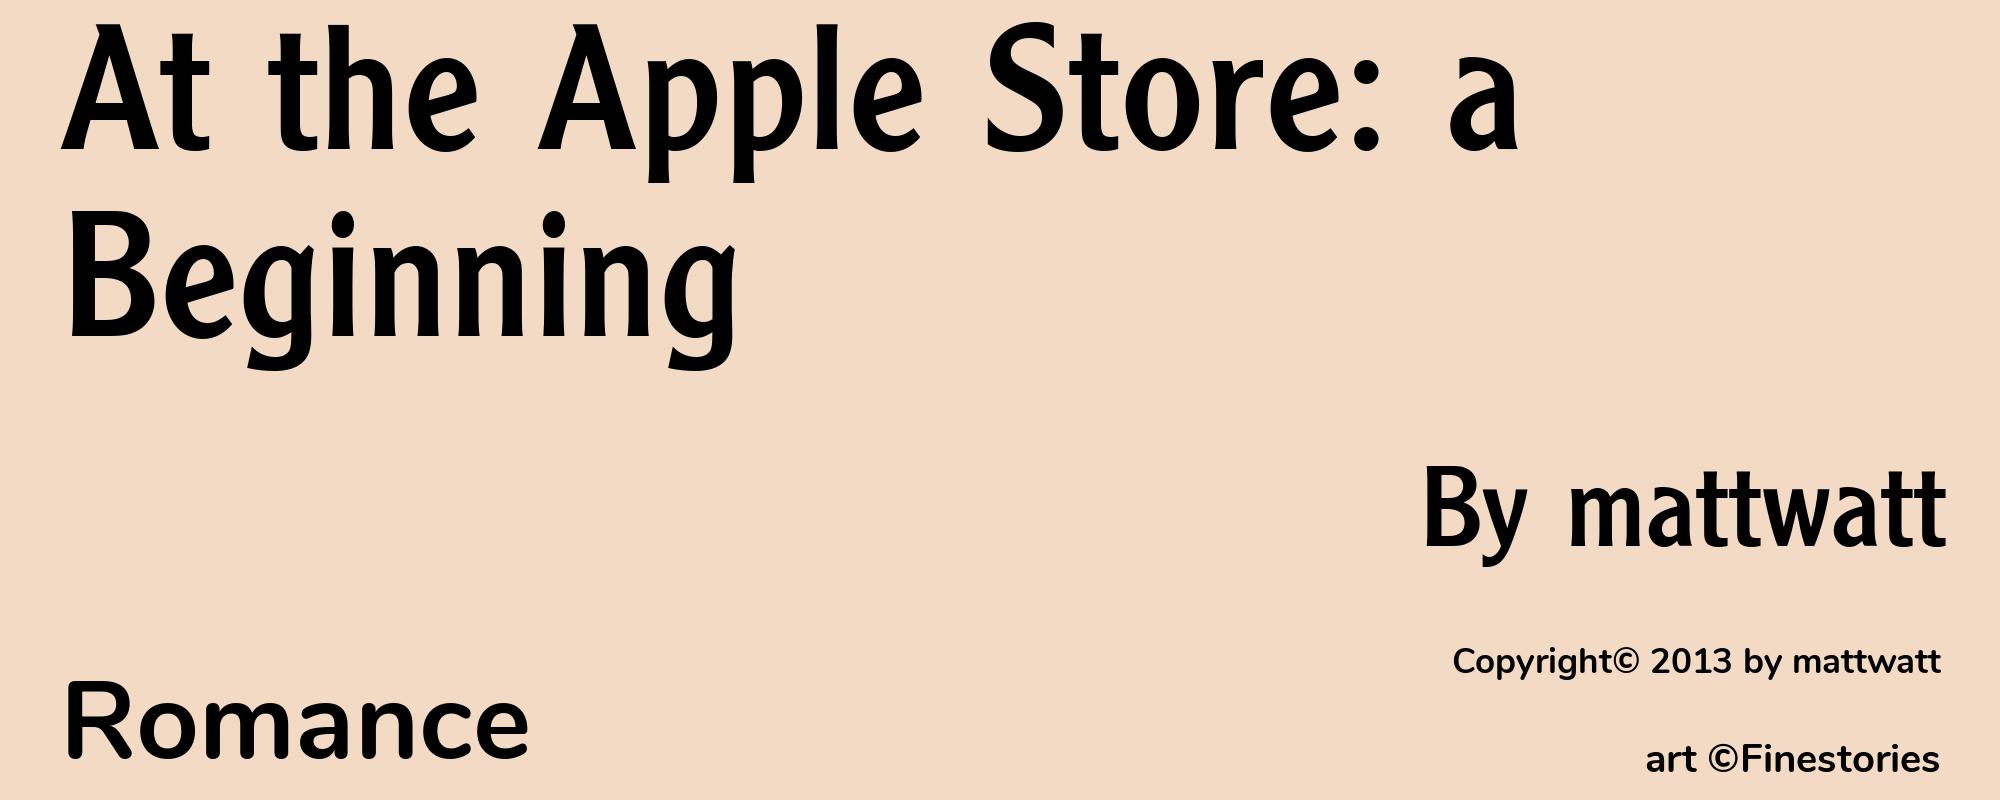 At the Apple Store: a Beginning - Cover